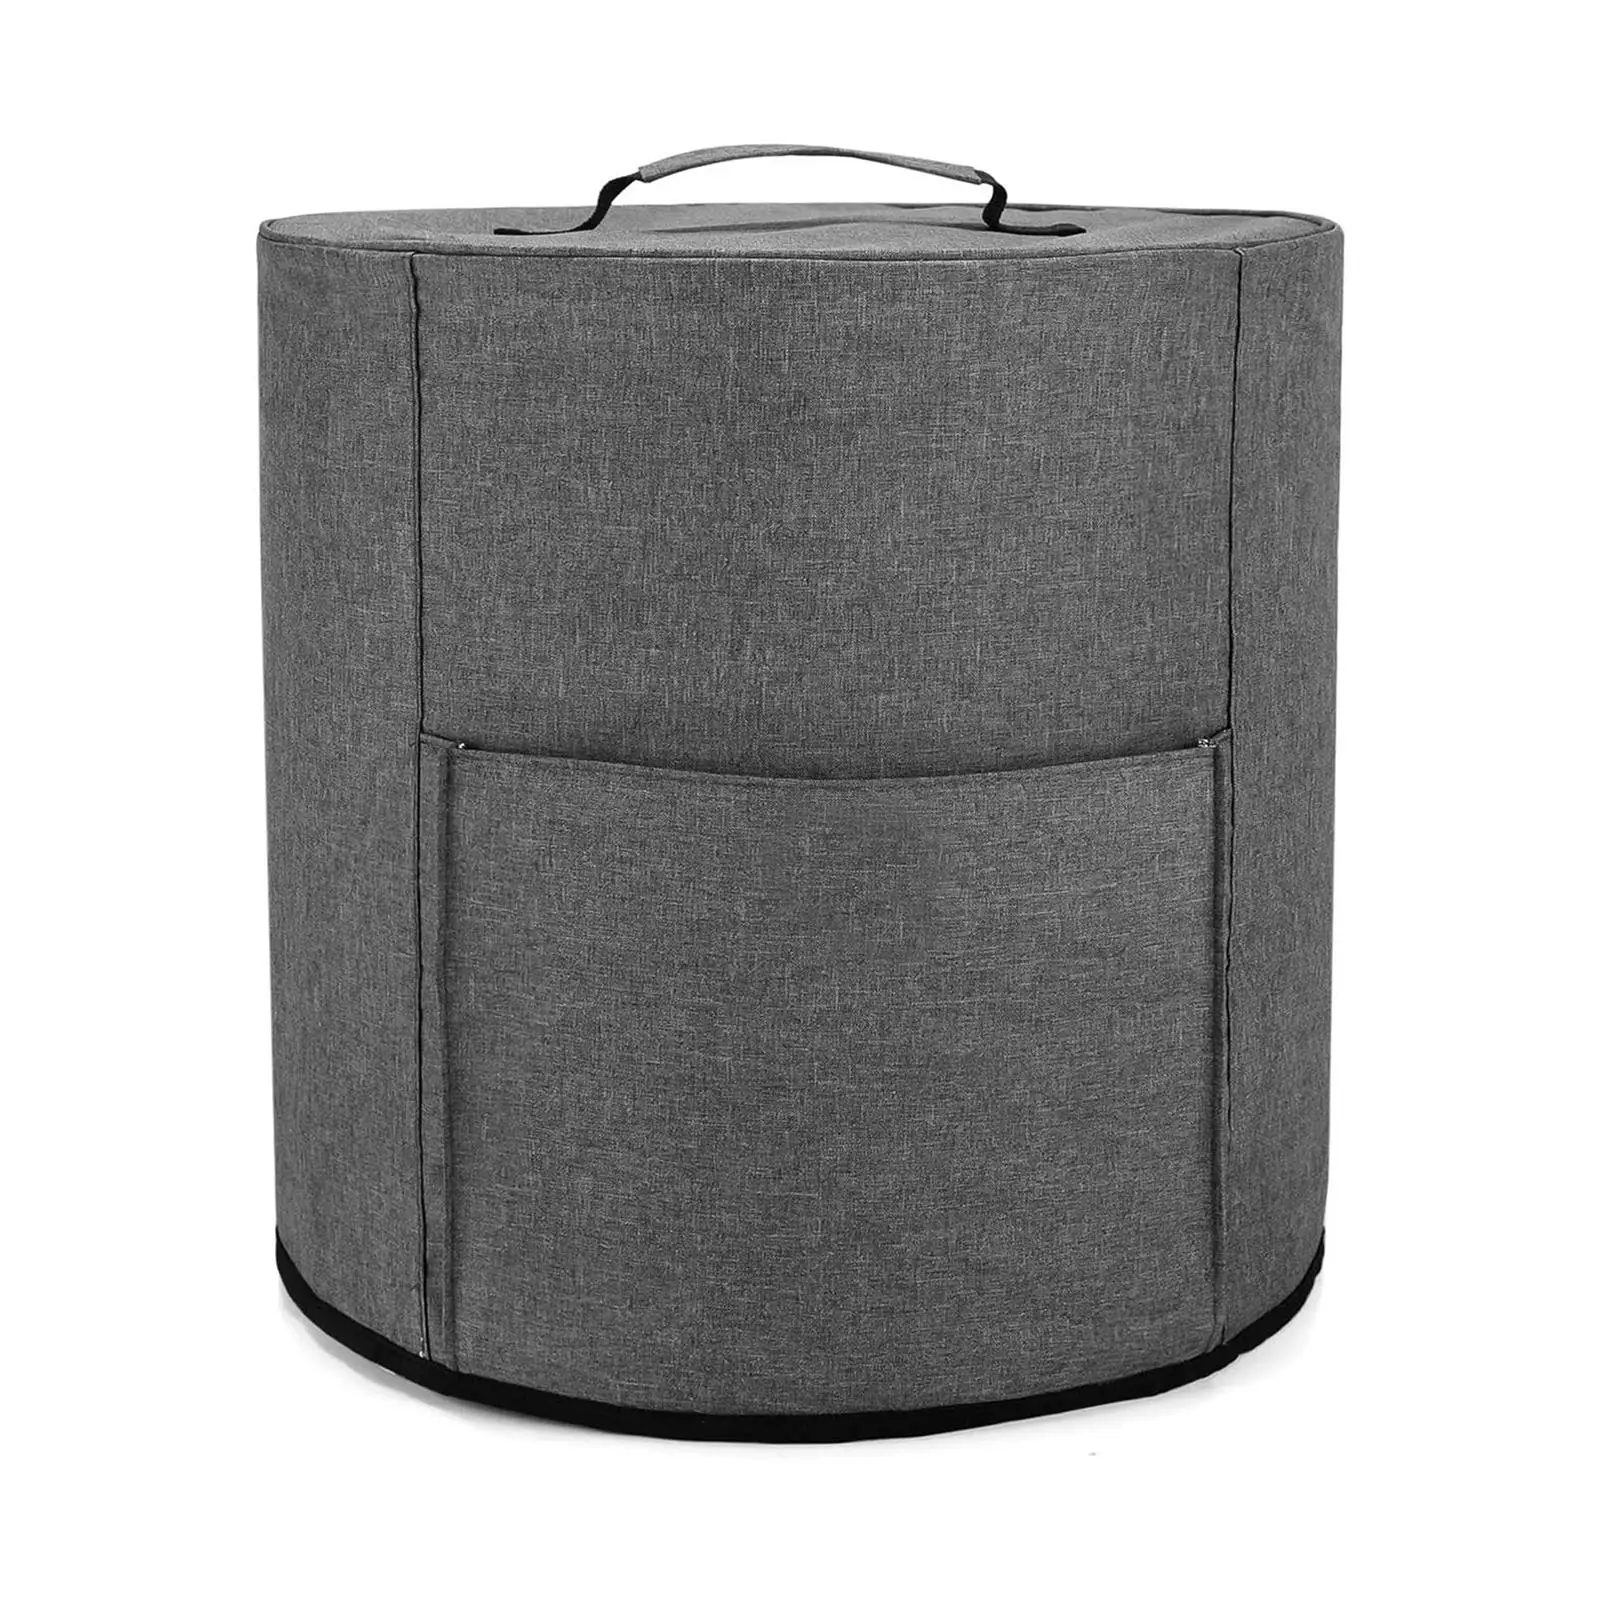 Air Fryer Cover Small Appliance Dust Cover Travel Reusable Kitchen Accessories Storage Cover for Kitchen Pot Cookware